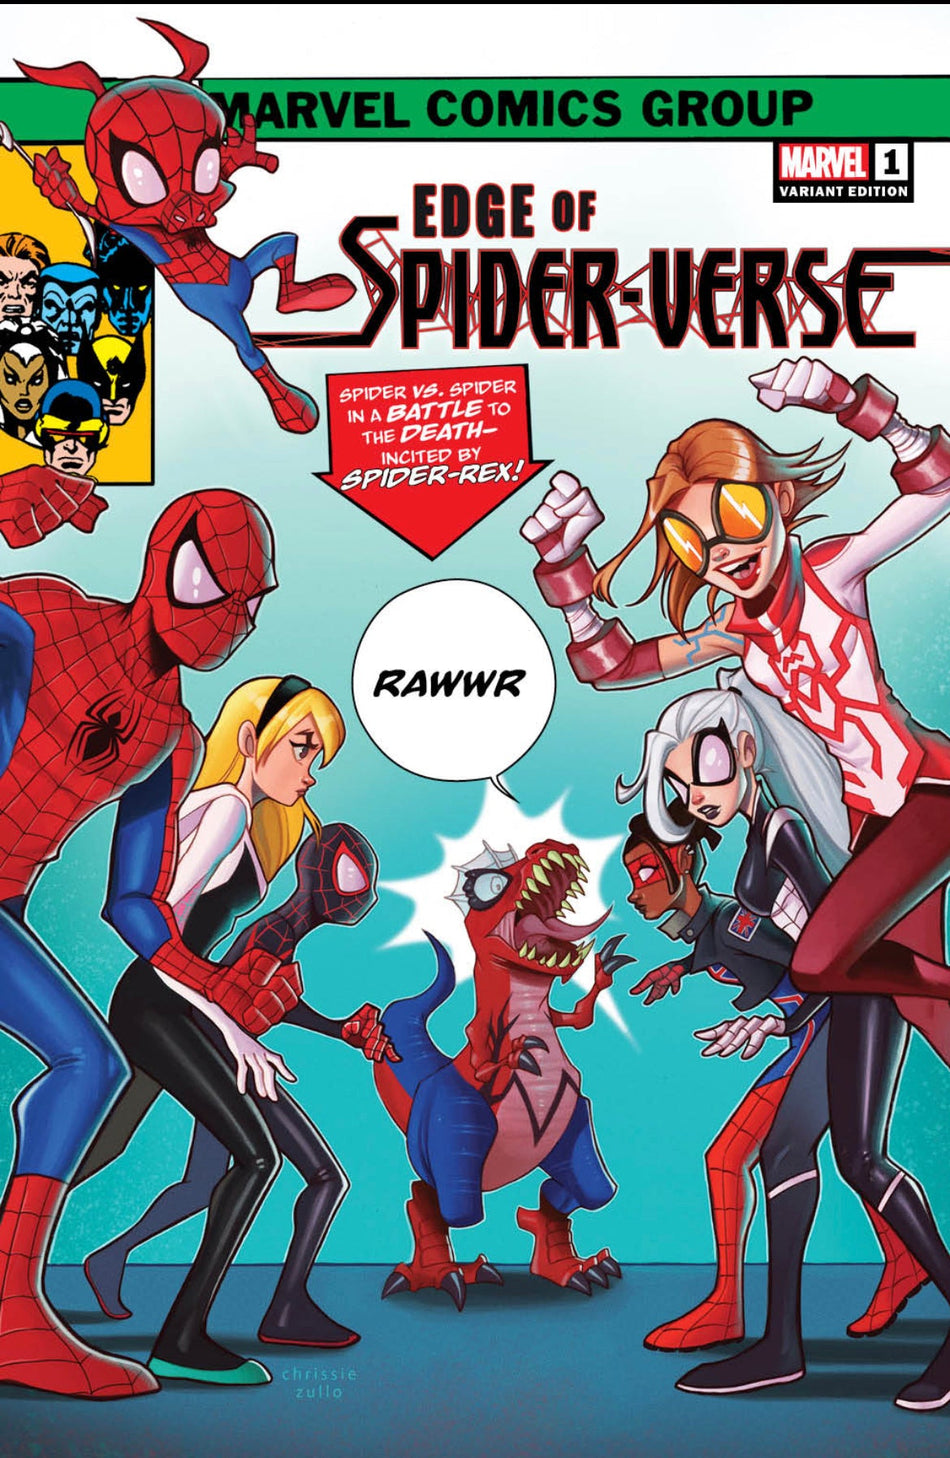 Edge of Spider-Verse V2 #1 Chrissie Zullo Exclusive Variant 1st cover appearance of the New Spider-UK